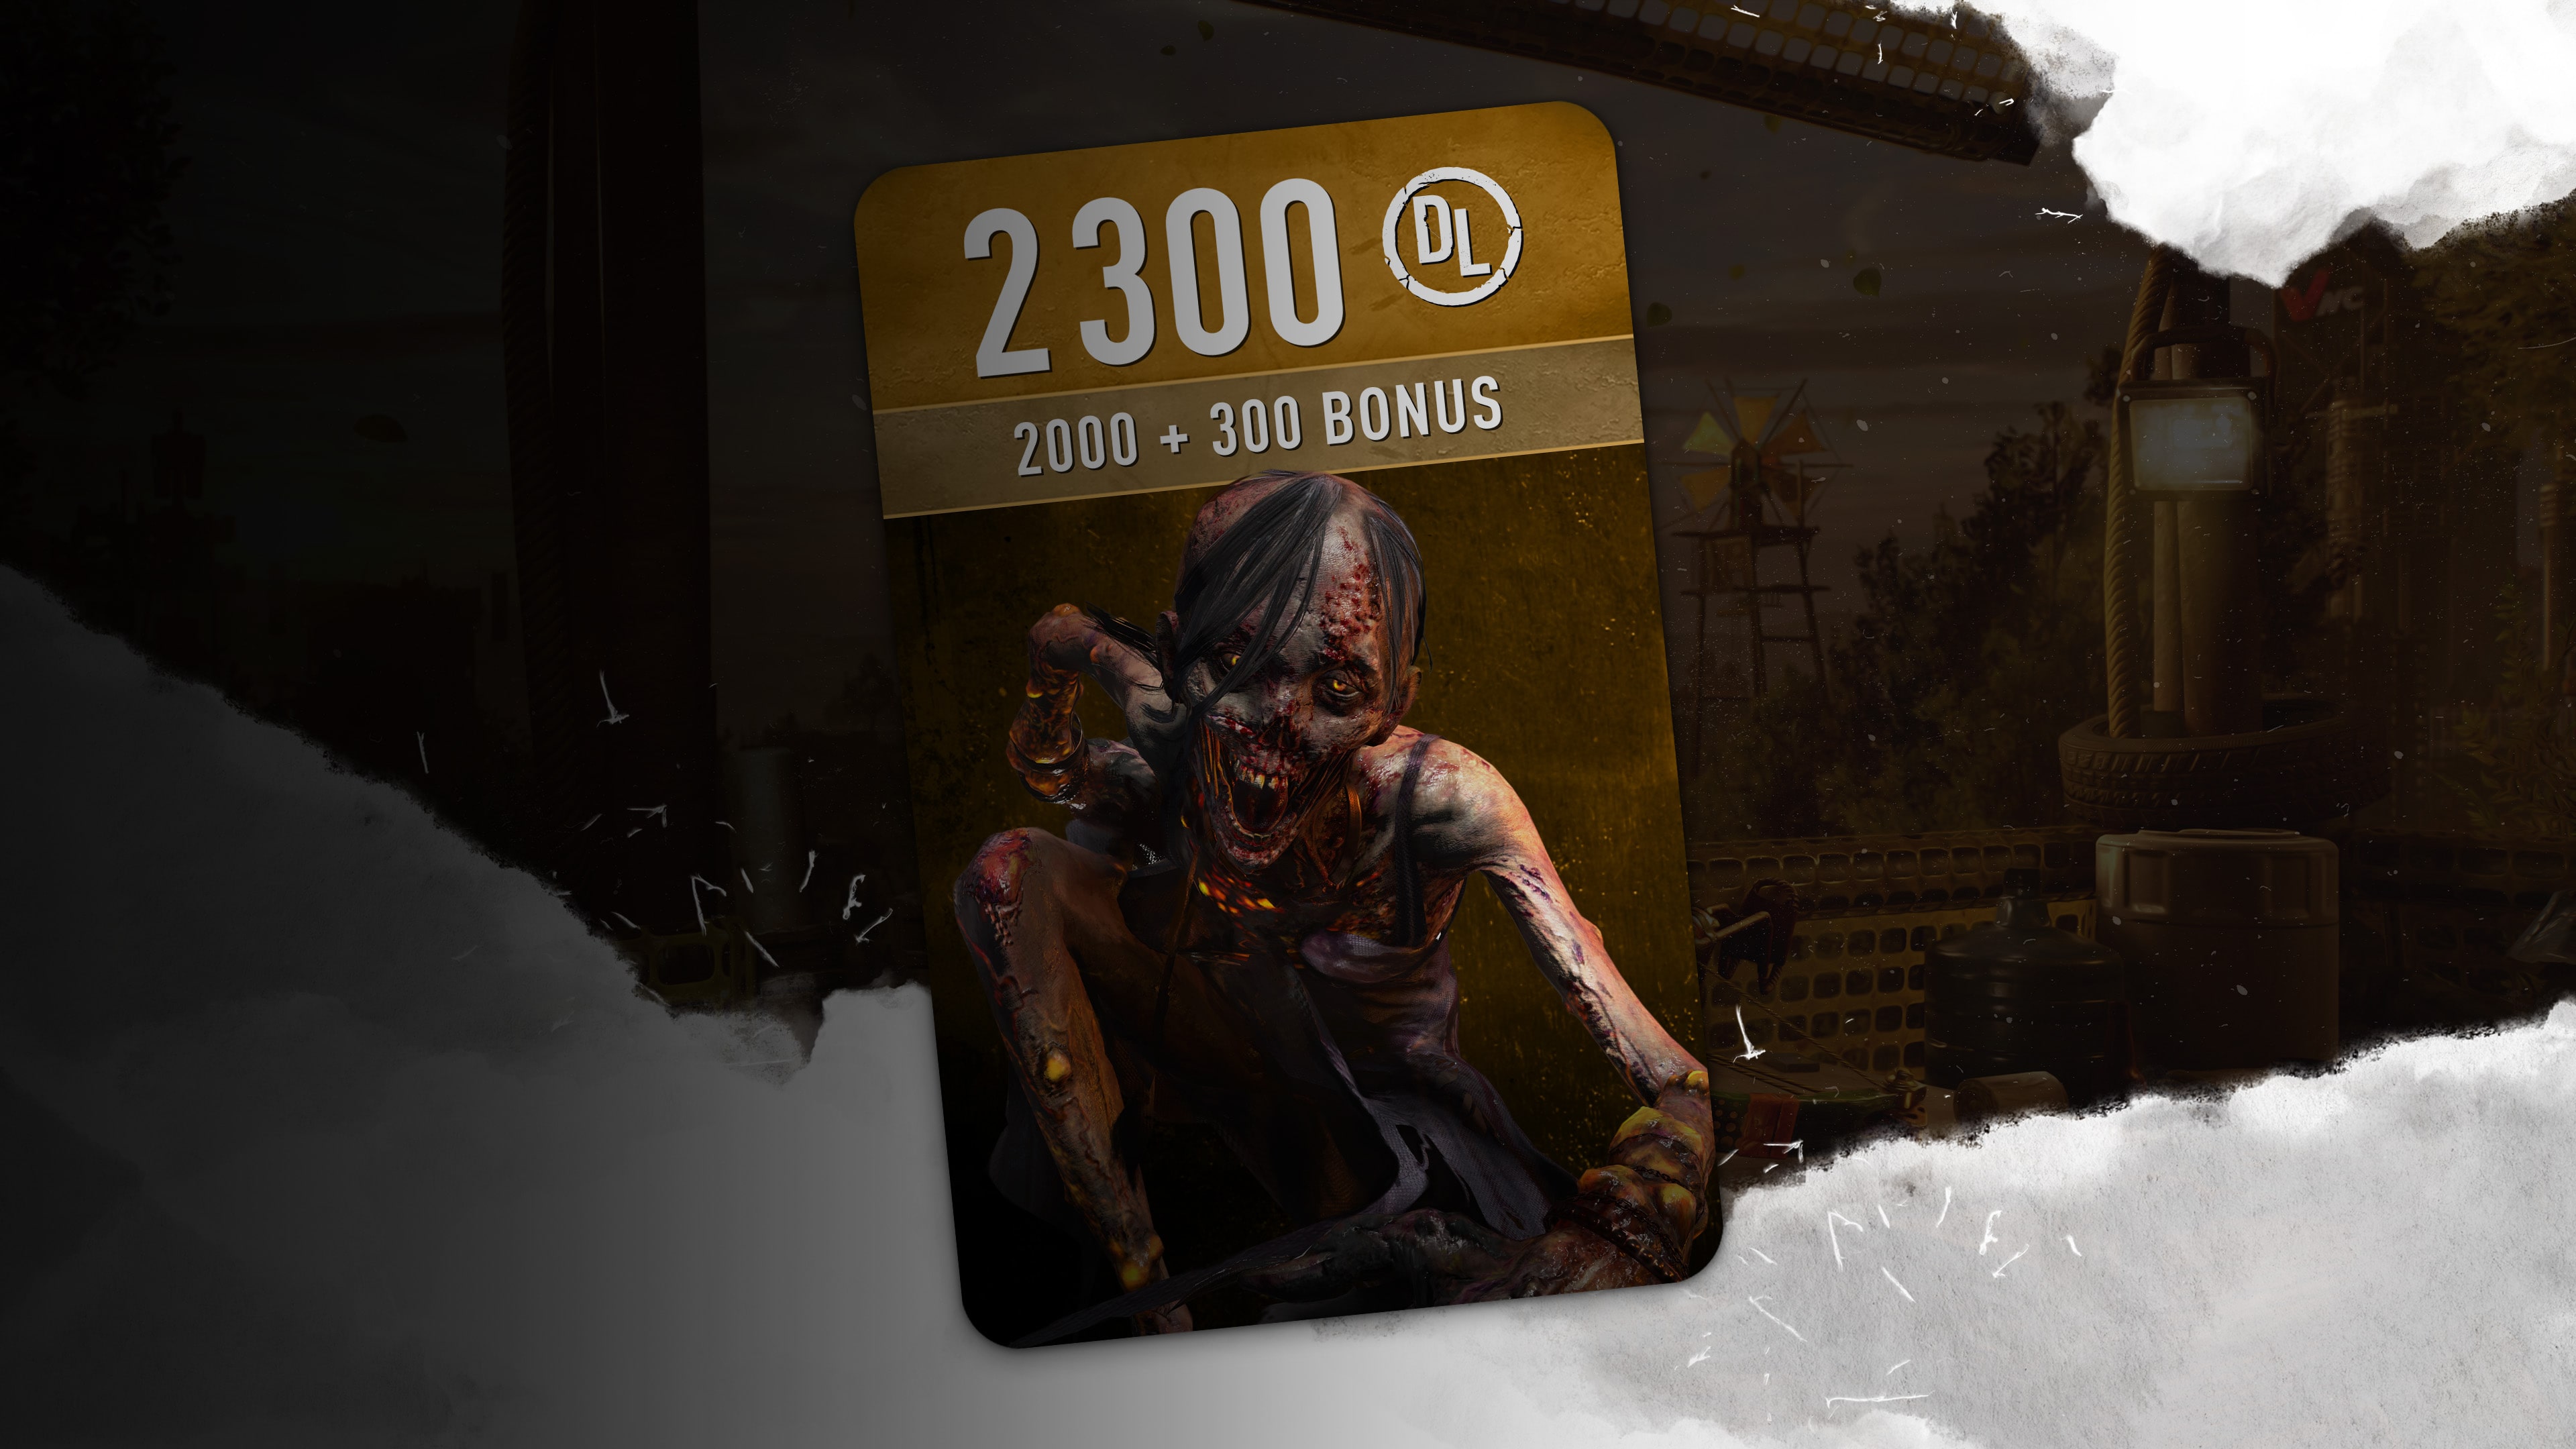 Dying Light 2 Stay Human - 2300 DL Points (English/Chinese/Korean/Japanese Ver.)